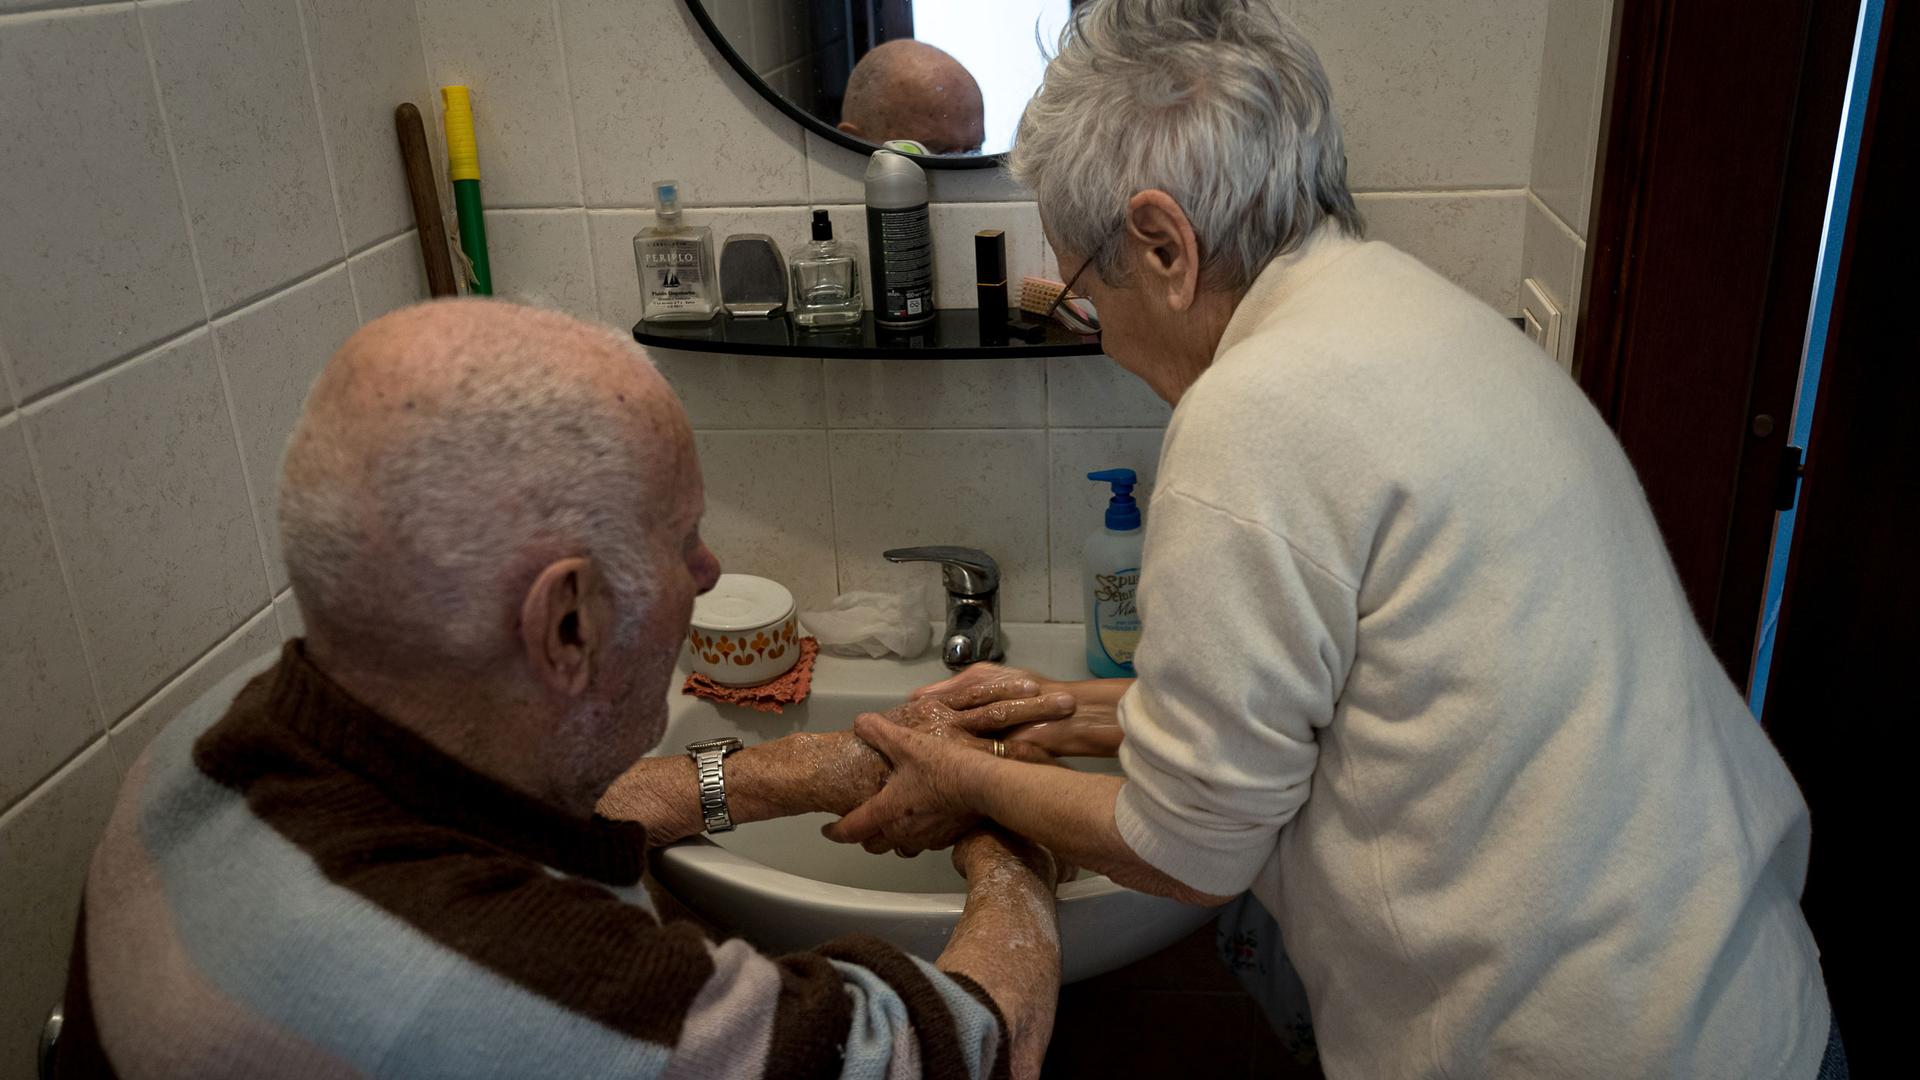 And older woman washes an older man's hands